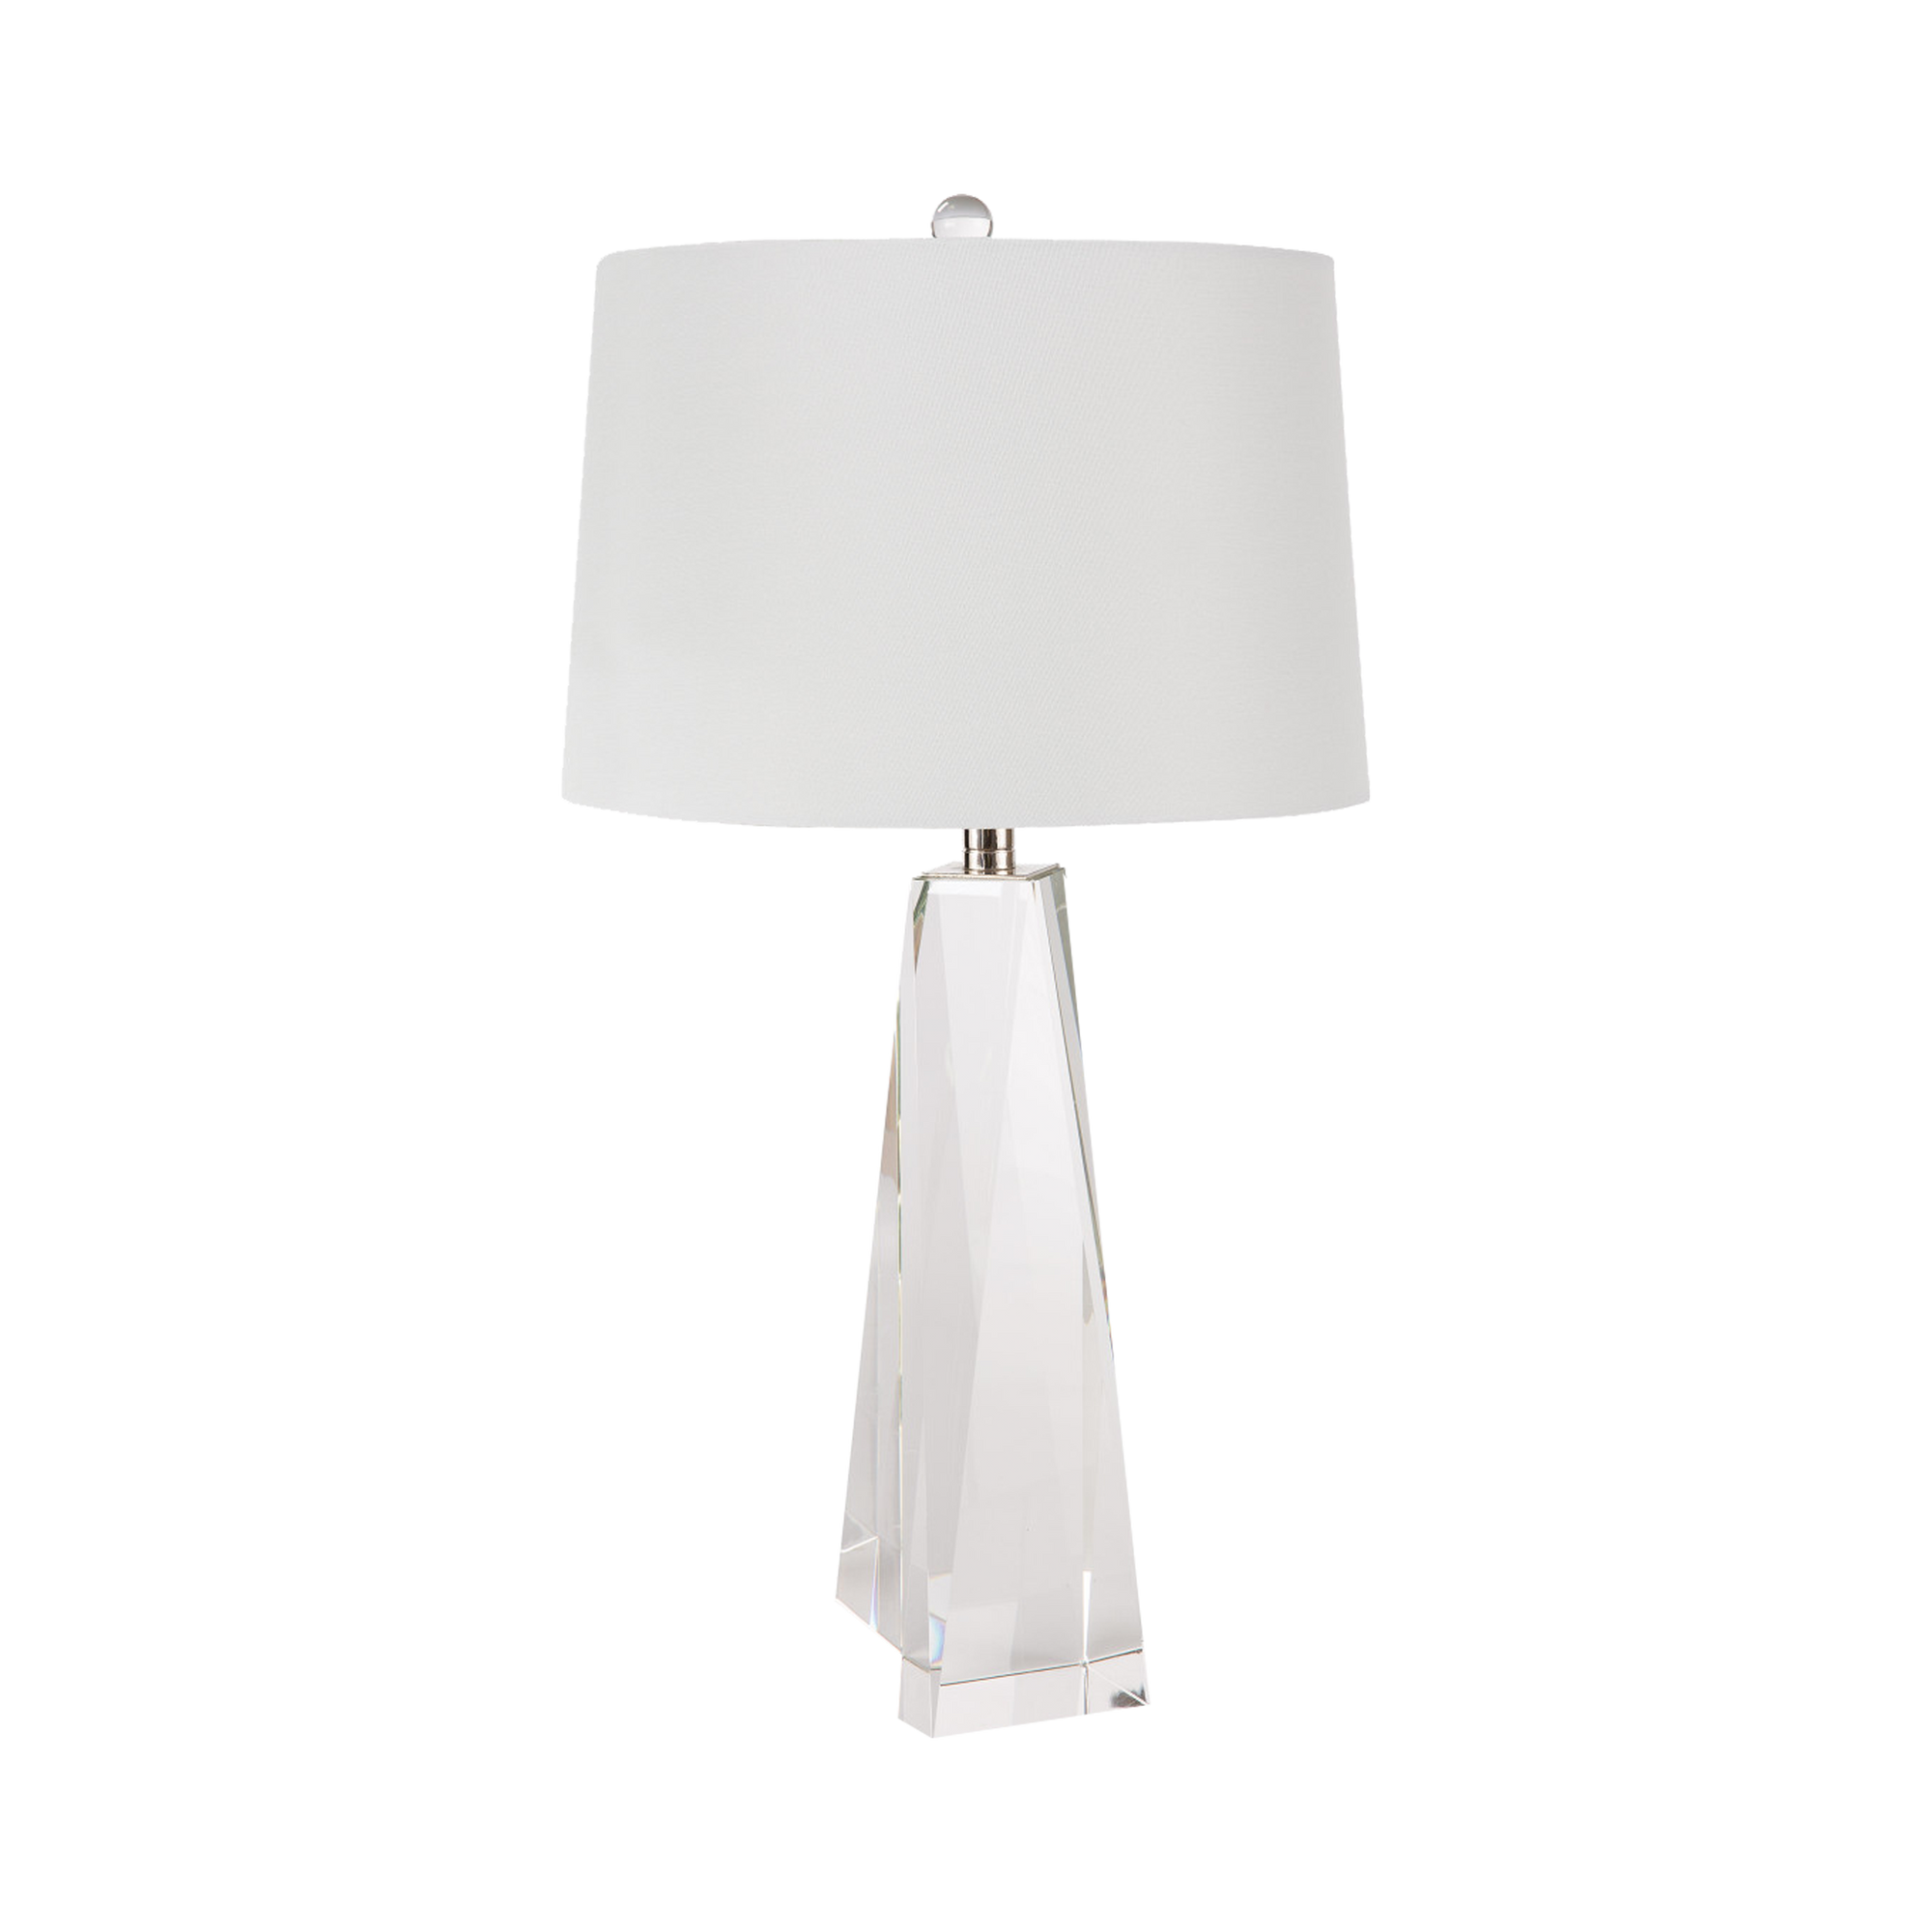 The Tapered Crystal Table Lamp is crafted of solid hand polished crystal, fitted with polished nickel hardware and topped with a natural linen tapered shade.